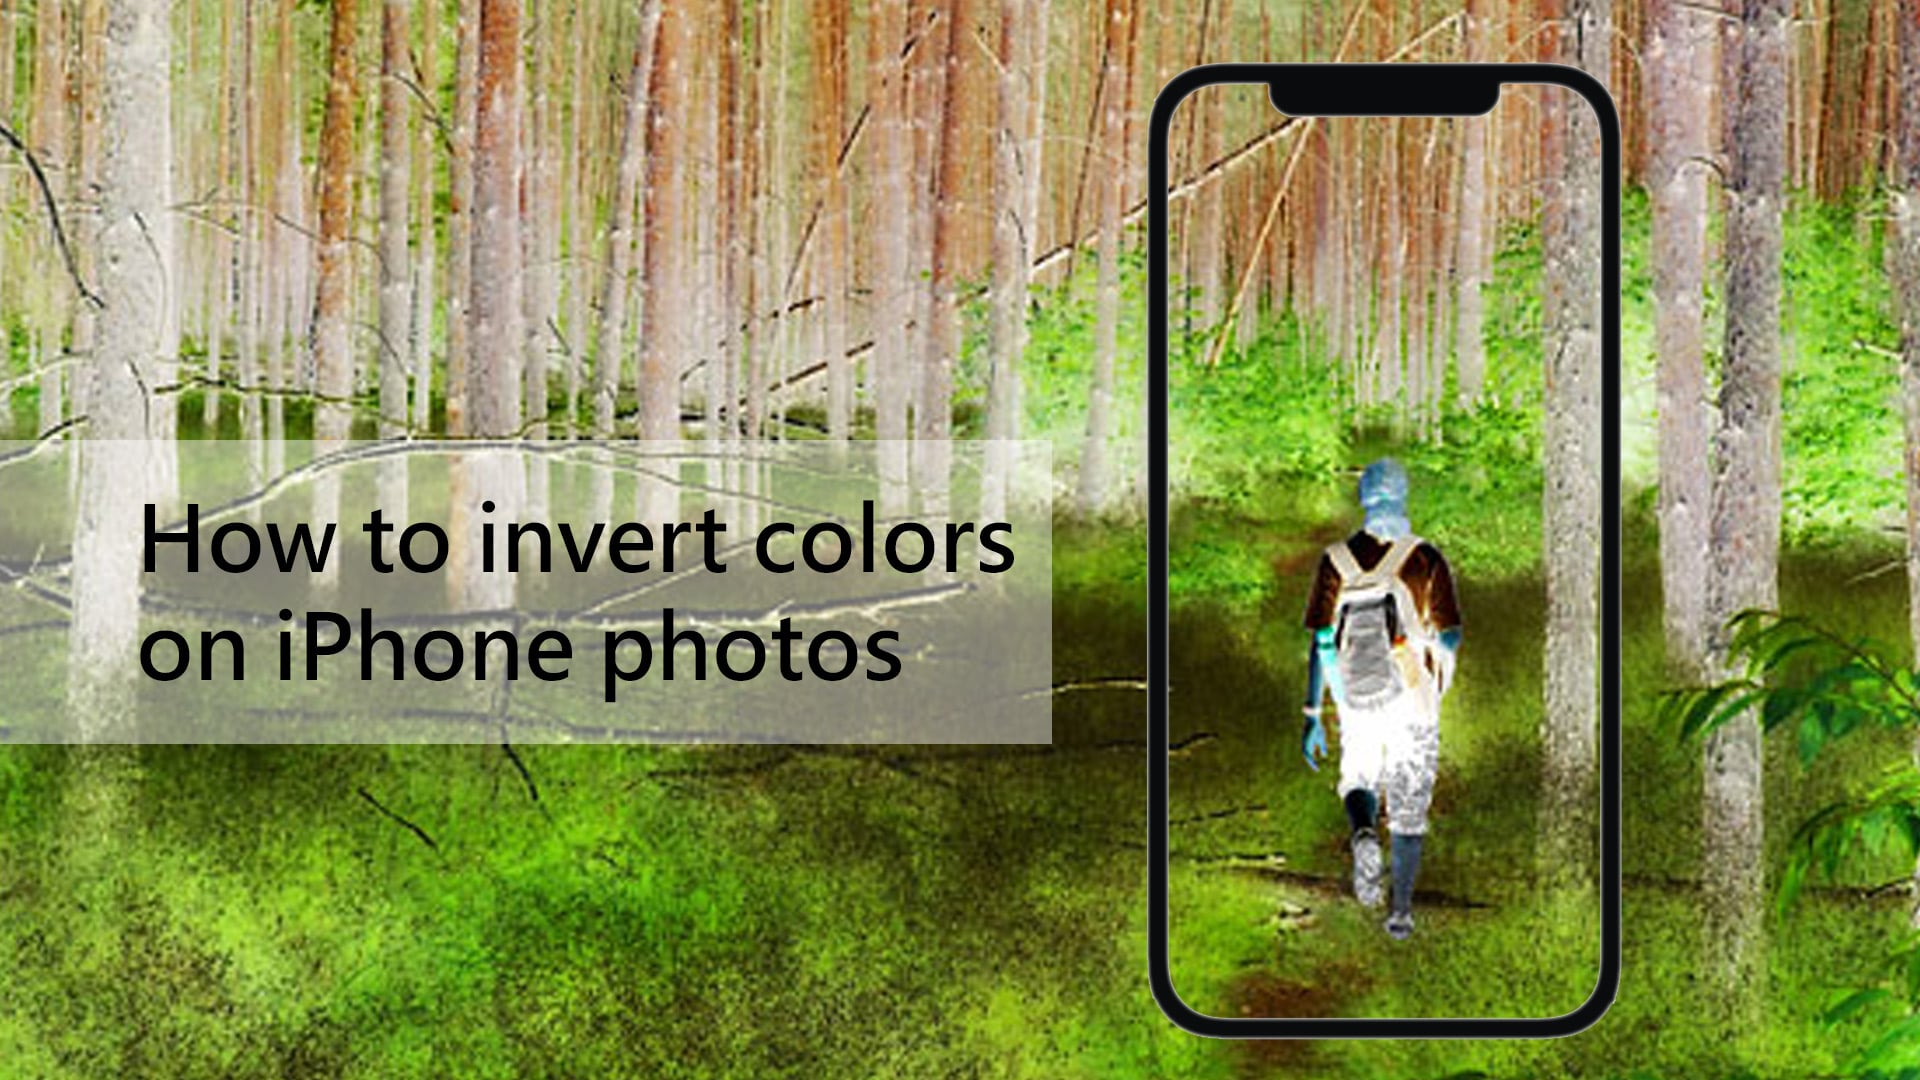 How to invert colors on iPhone photos